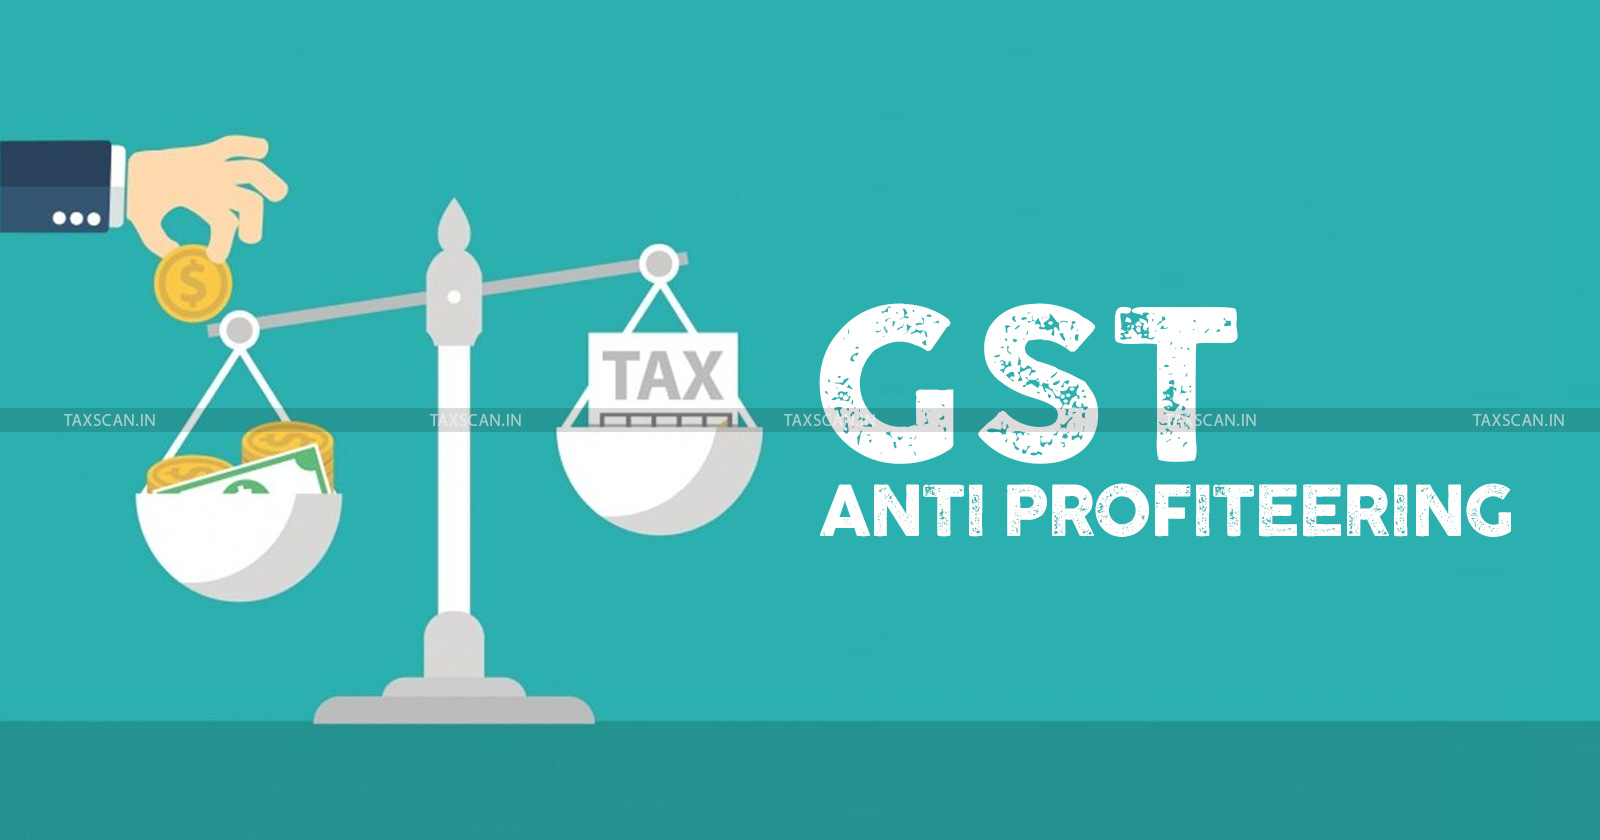 Constitutional - GST Anti Profiteering Provisions - Supreme Court issues Notice to Centre - TAXSCAN